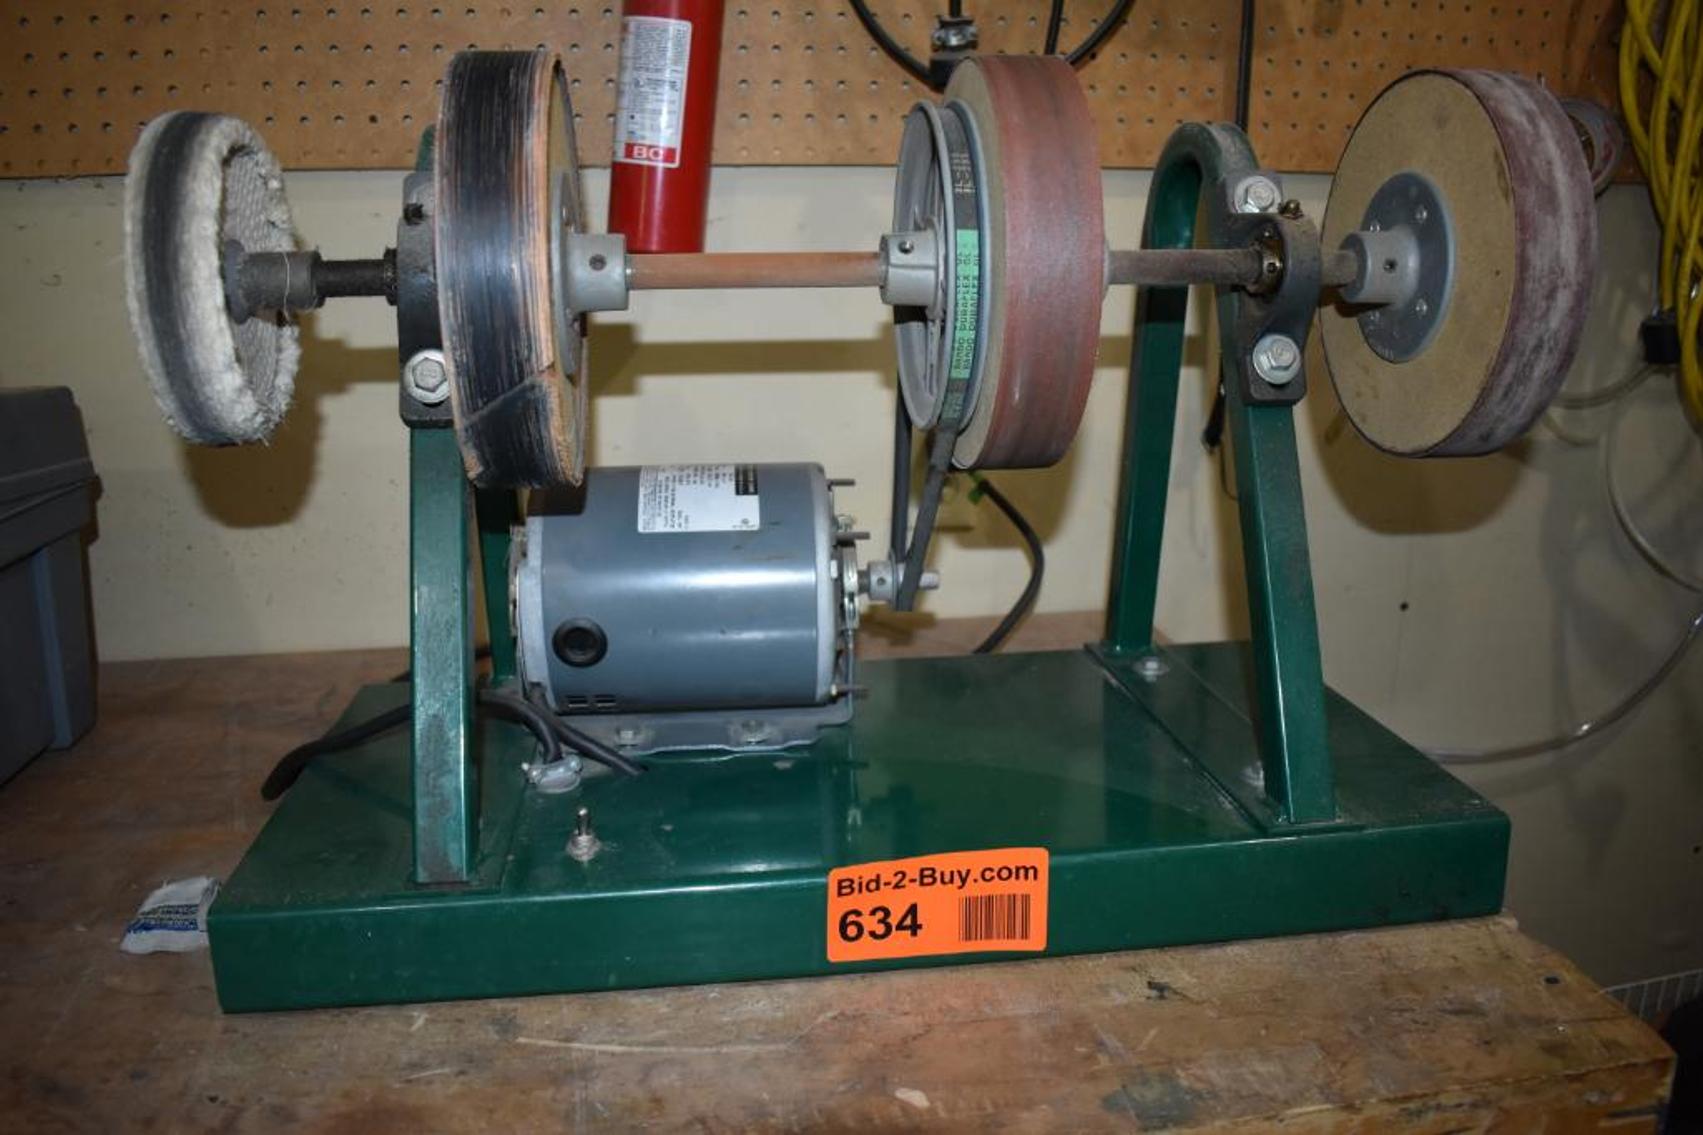 Personal Property Moving Sale: Woodworking Tools, Crystal and Sterling Silver